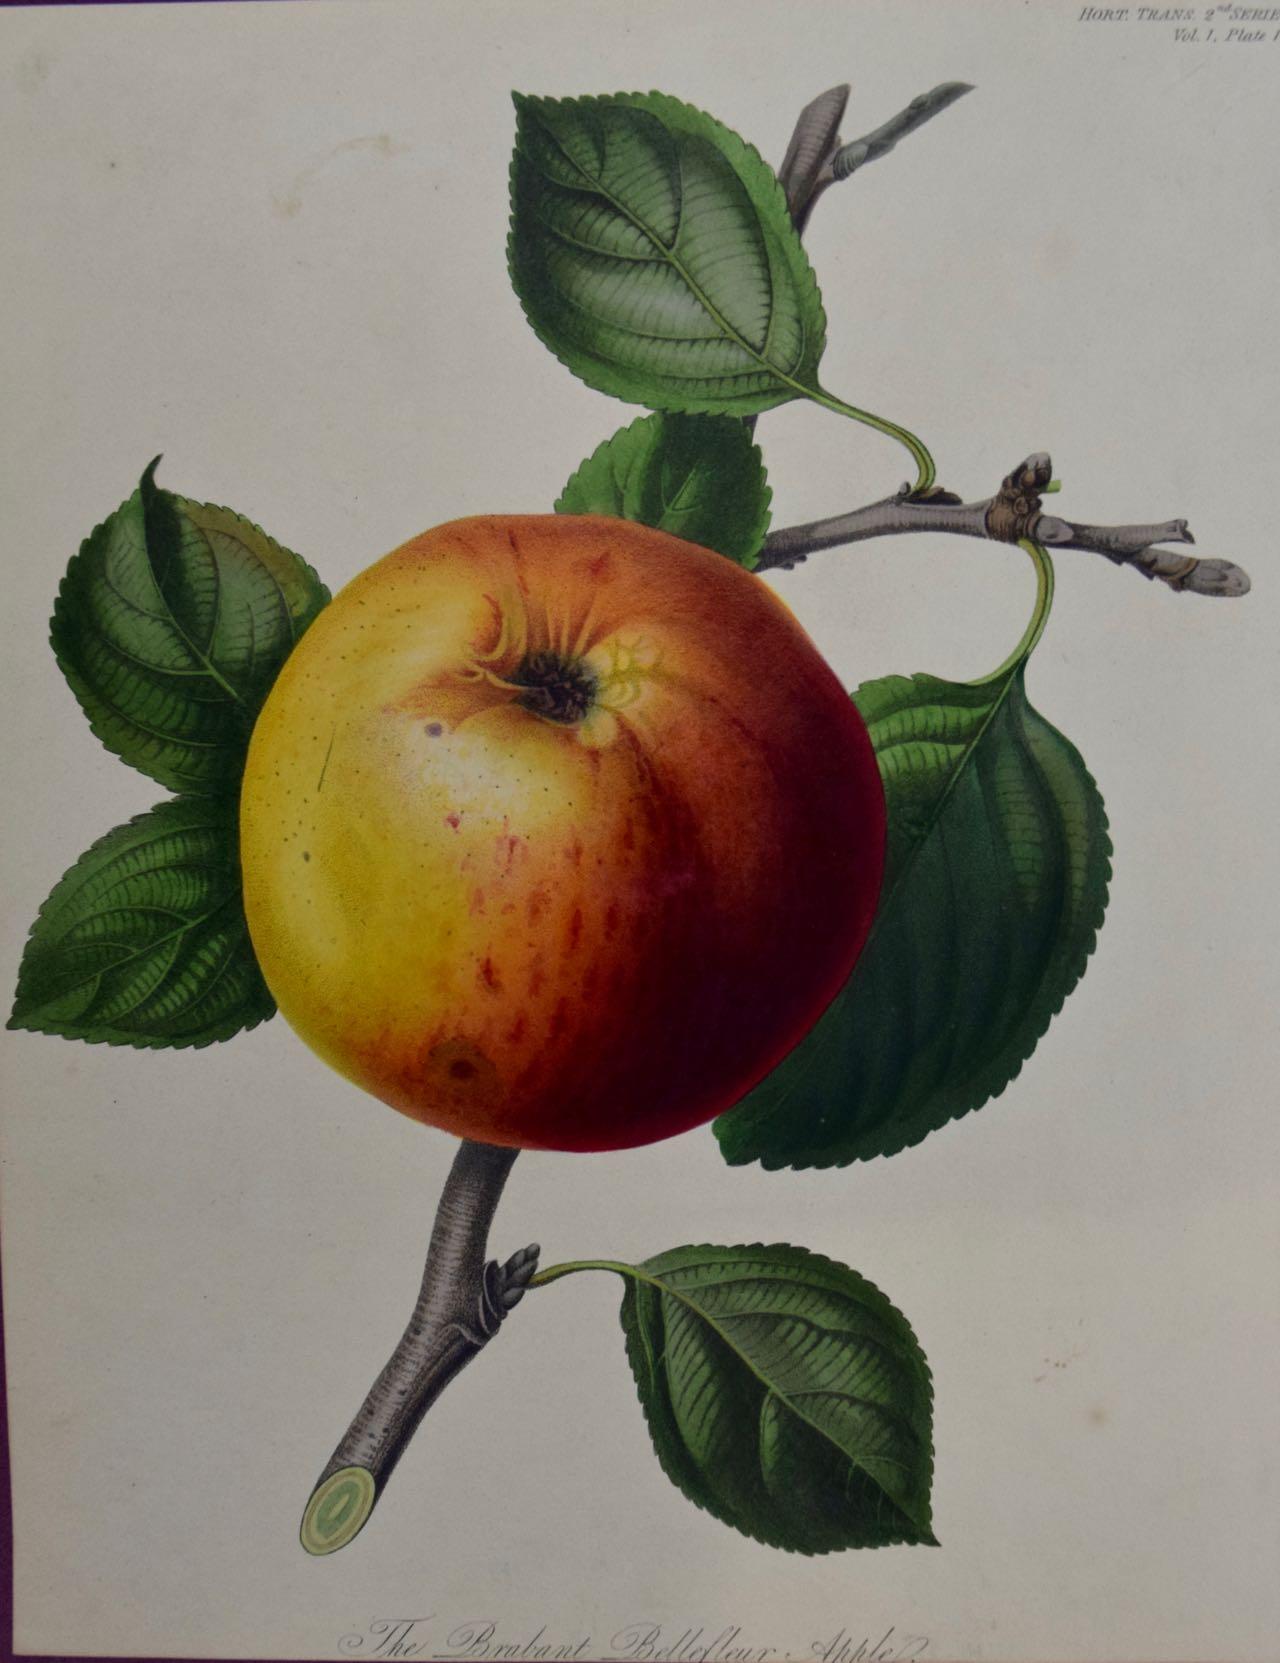 Brabant Apple: A 19th Century Hand-colored Engraving by Augusta Innes Withers